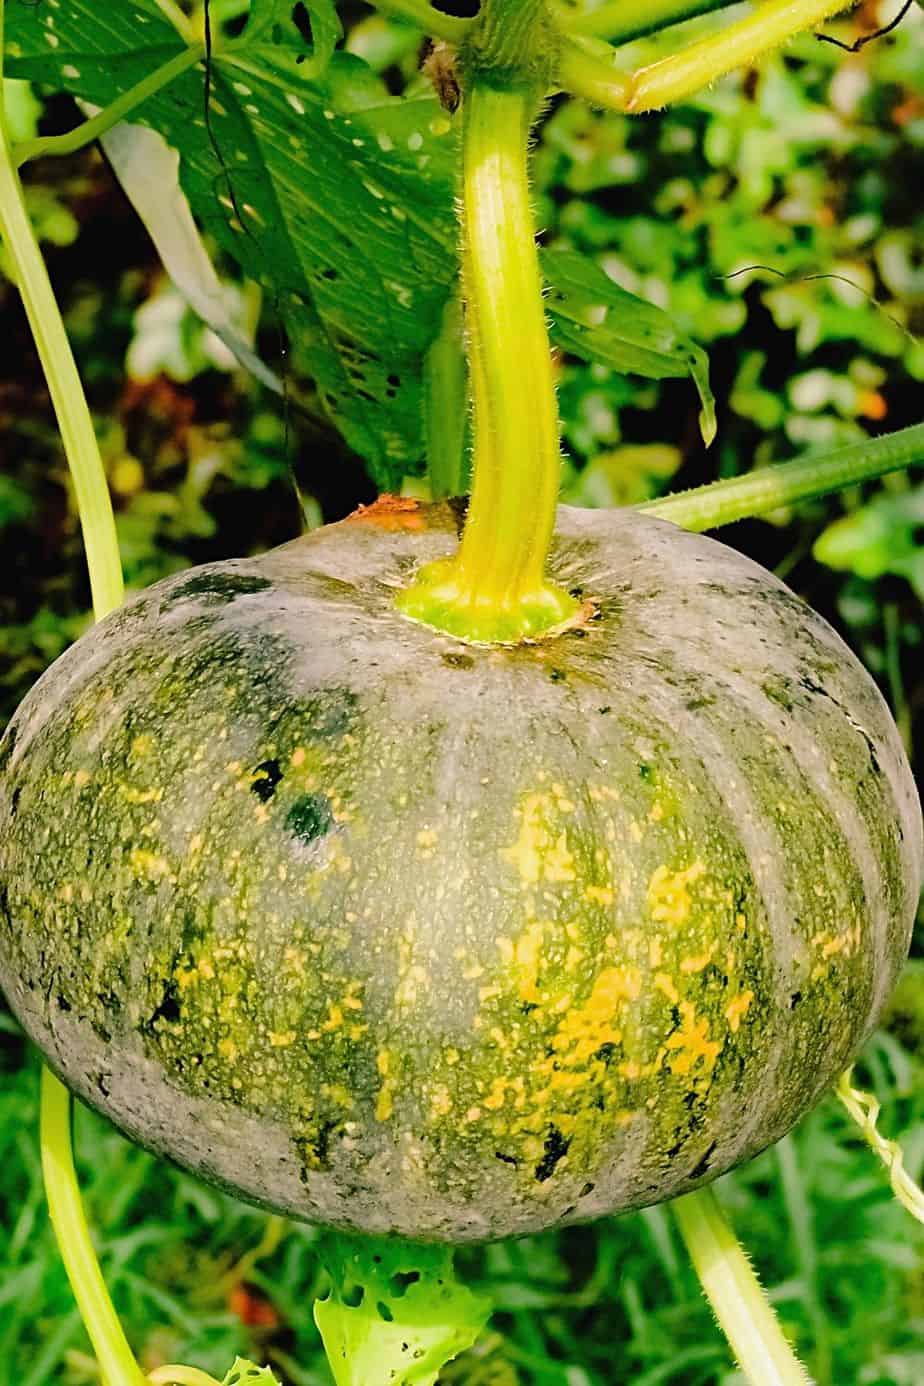 Though Patty Pans are part of the squash family, they don't require peeling — and grows well in raised beds